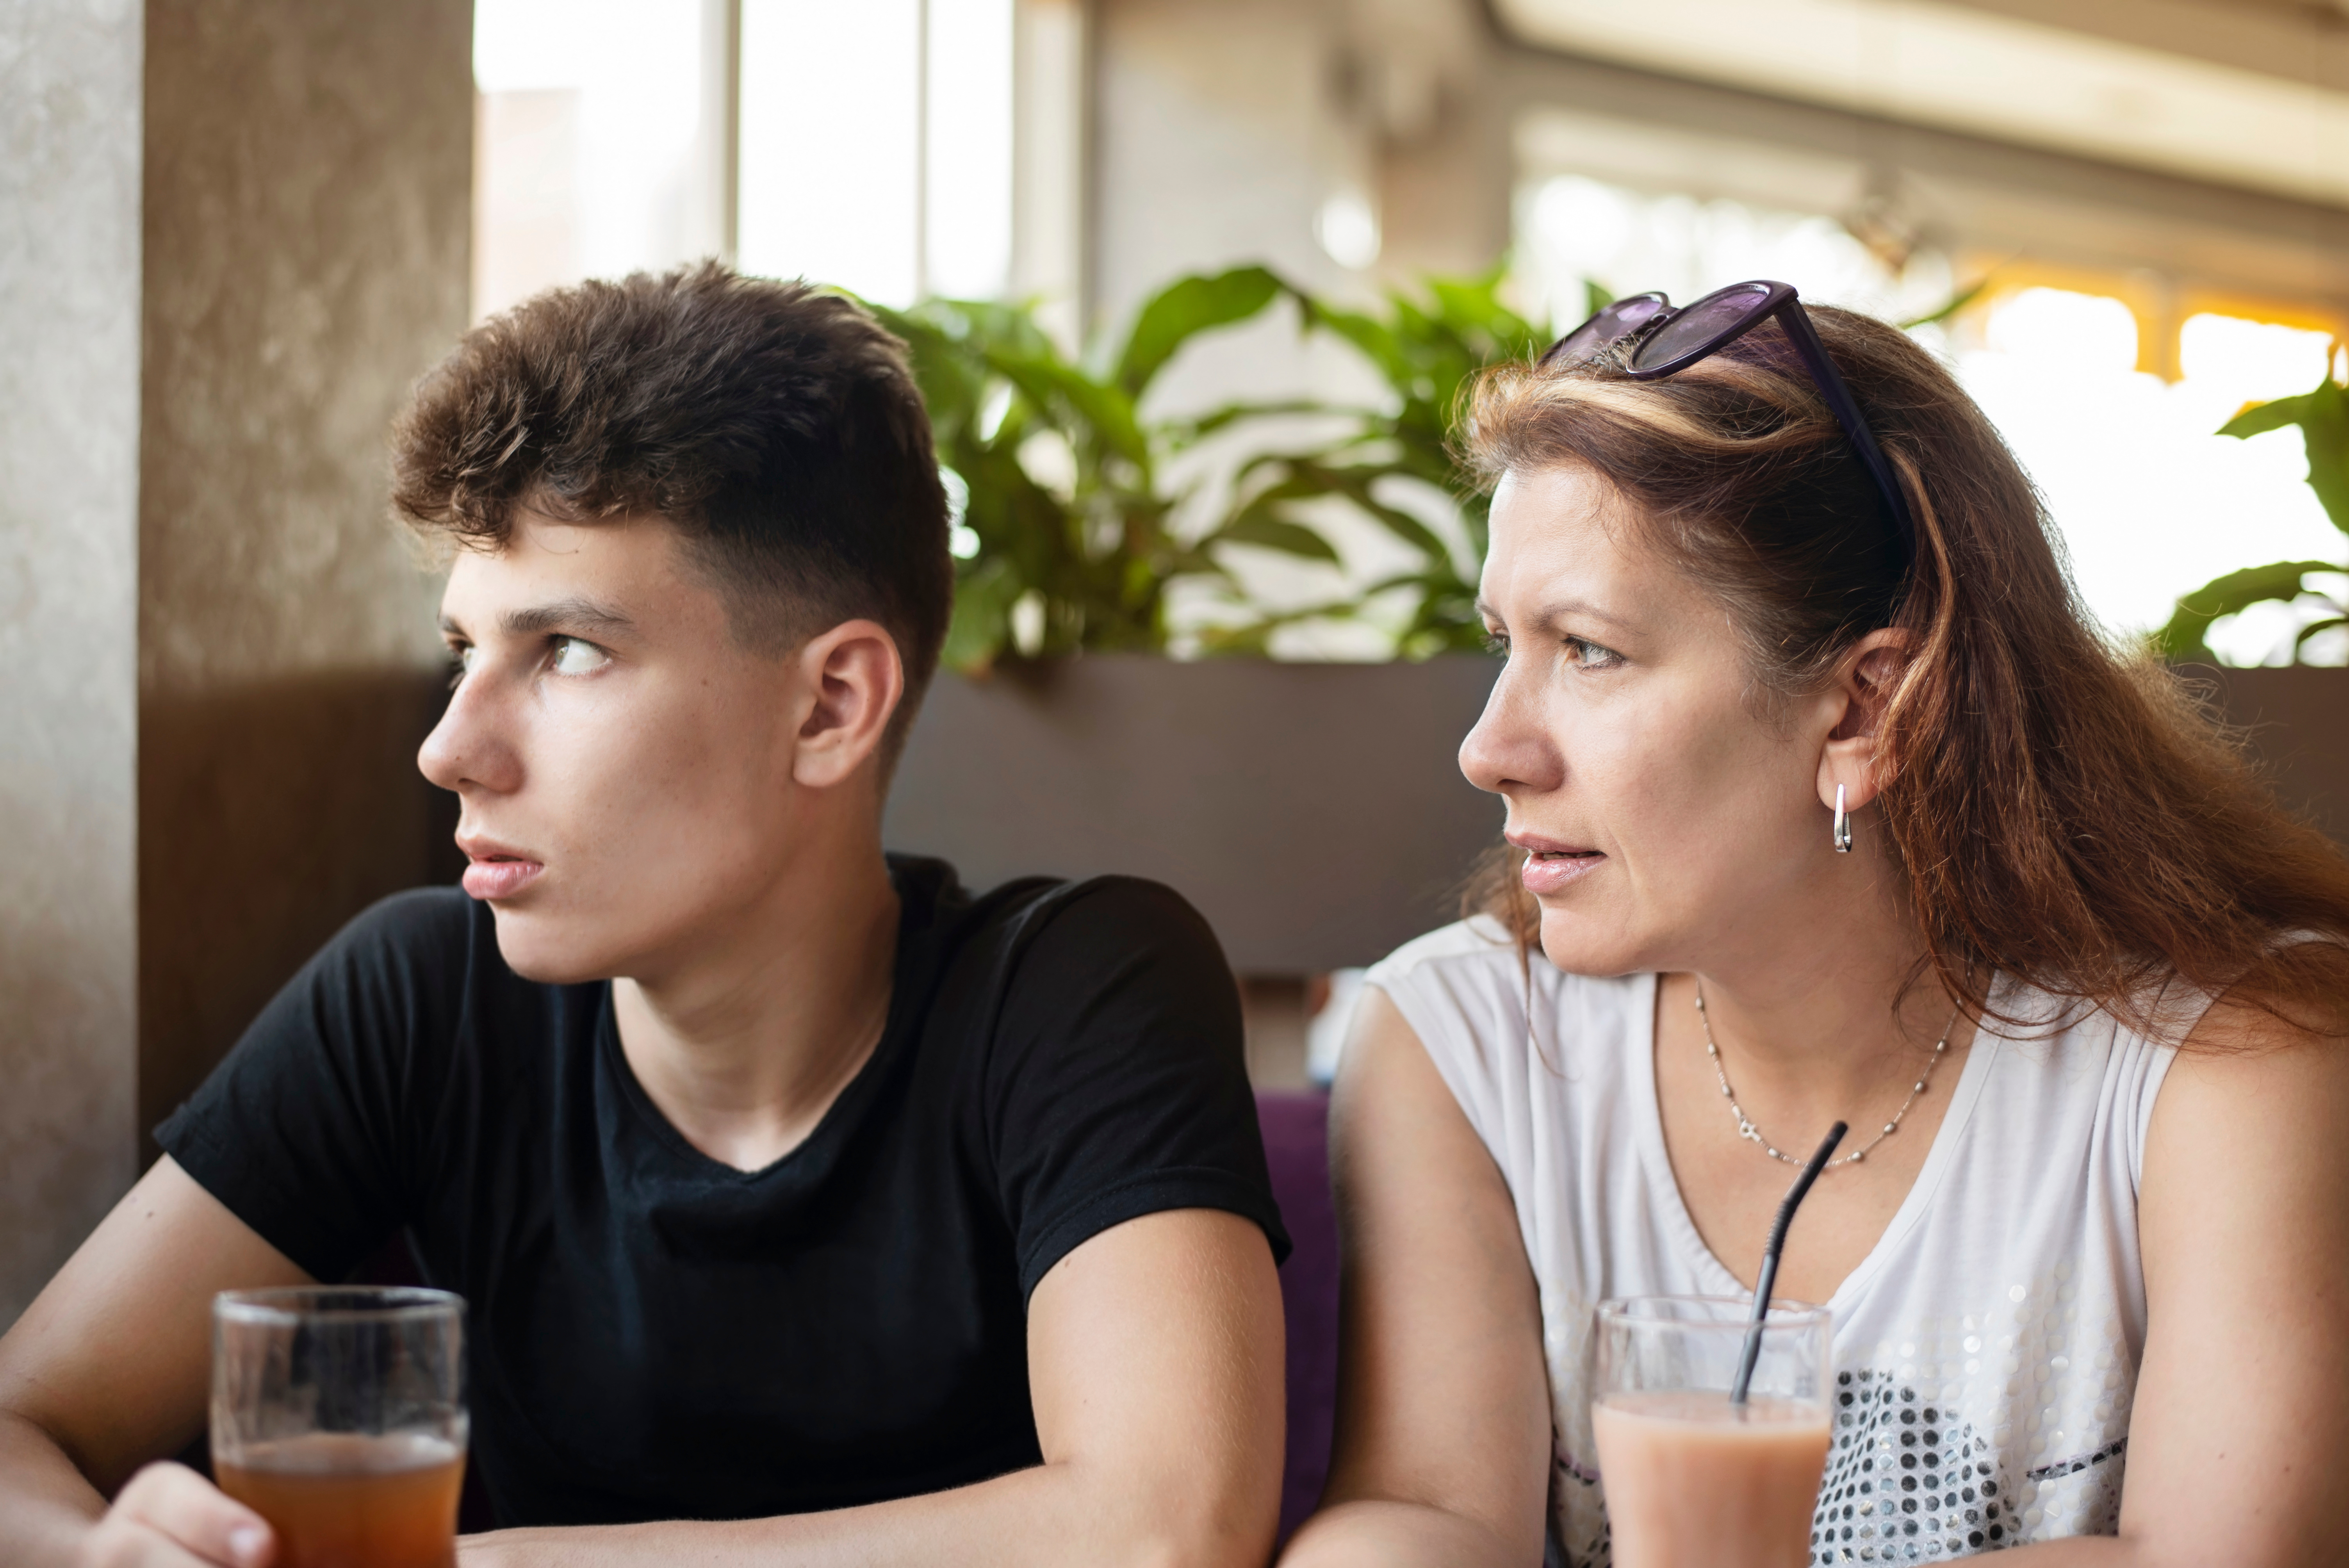 A mother talking to her teenager son | Source: Shutterstock